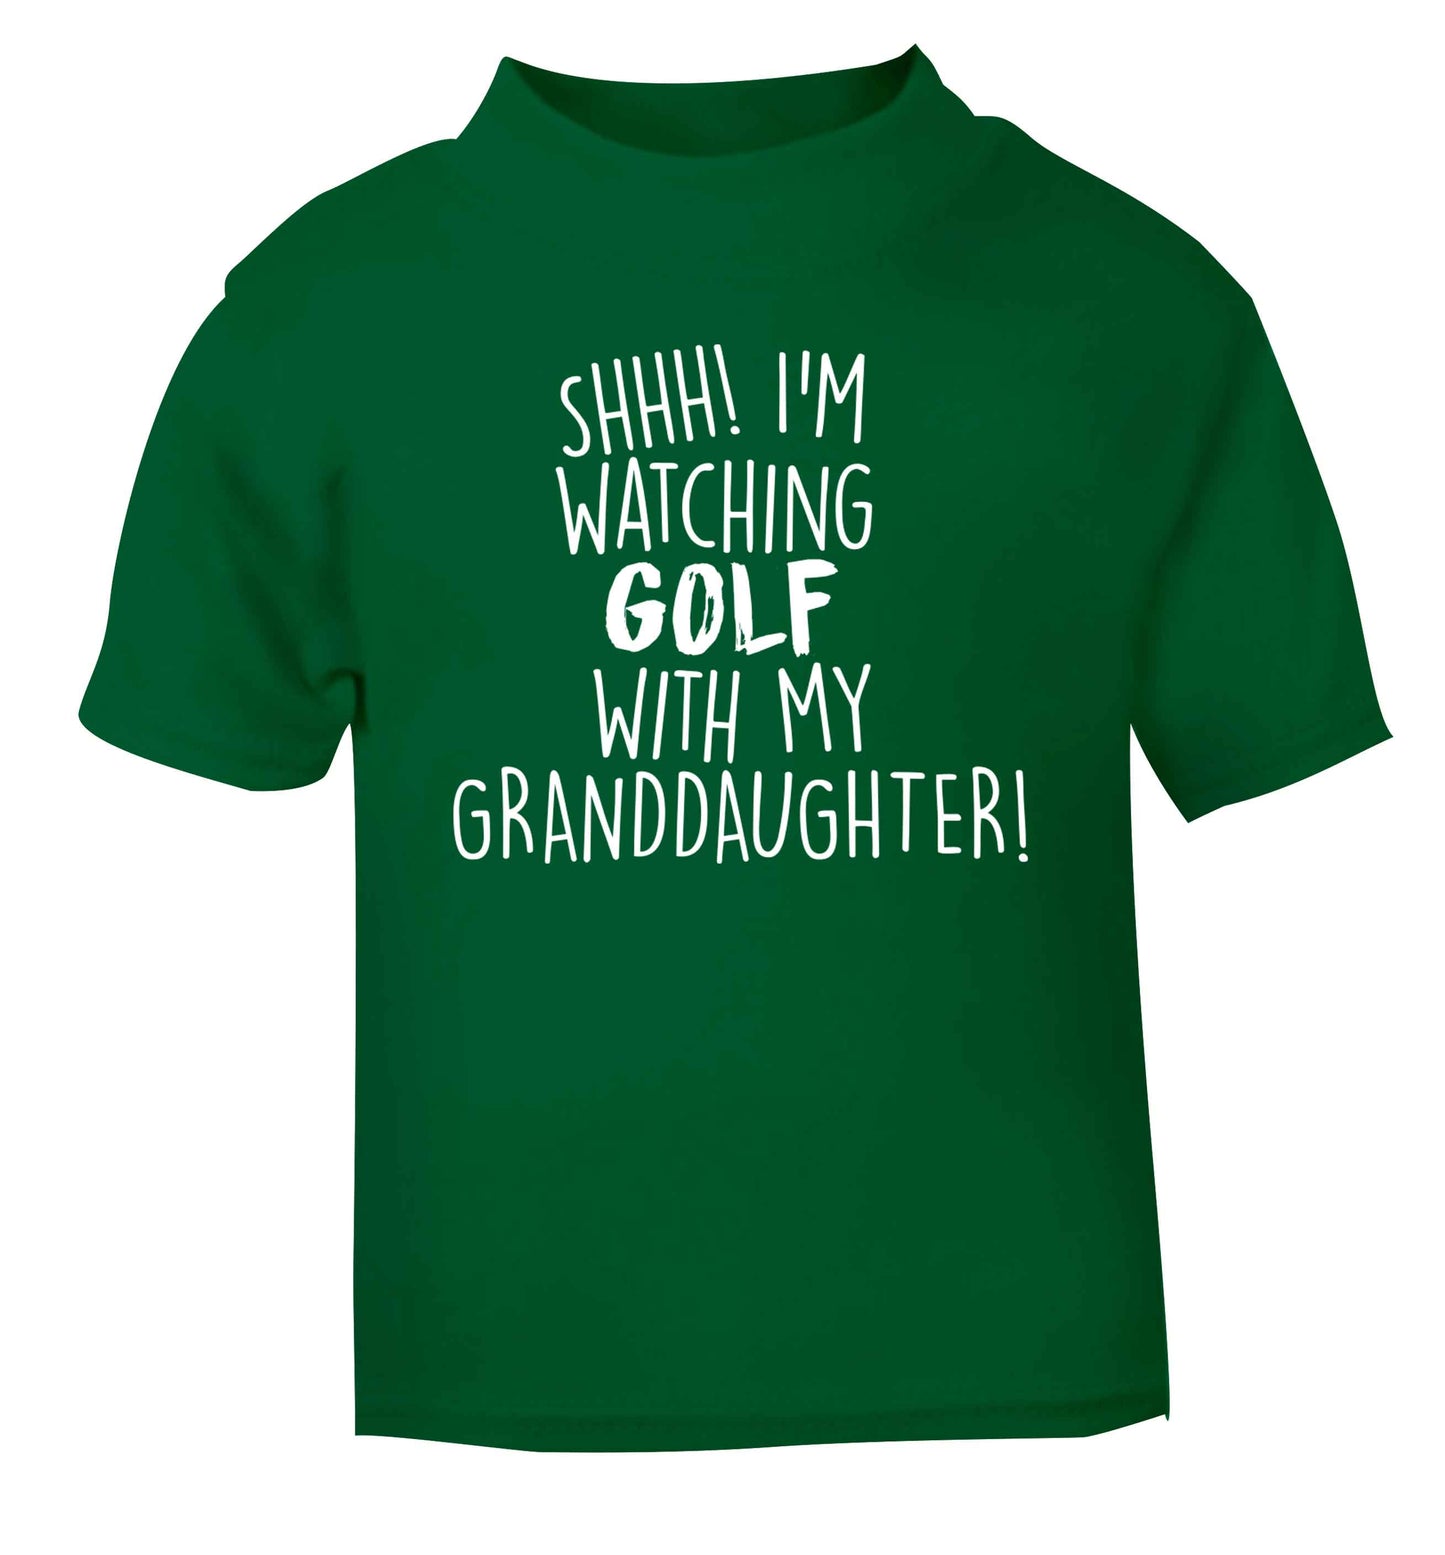 Shh I'm watching golf with my granddaughter green Baby Toddler Tshirt 2 Years